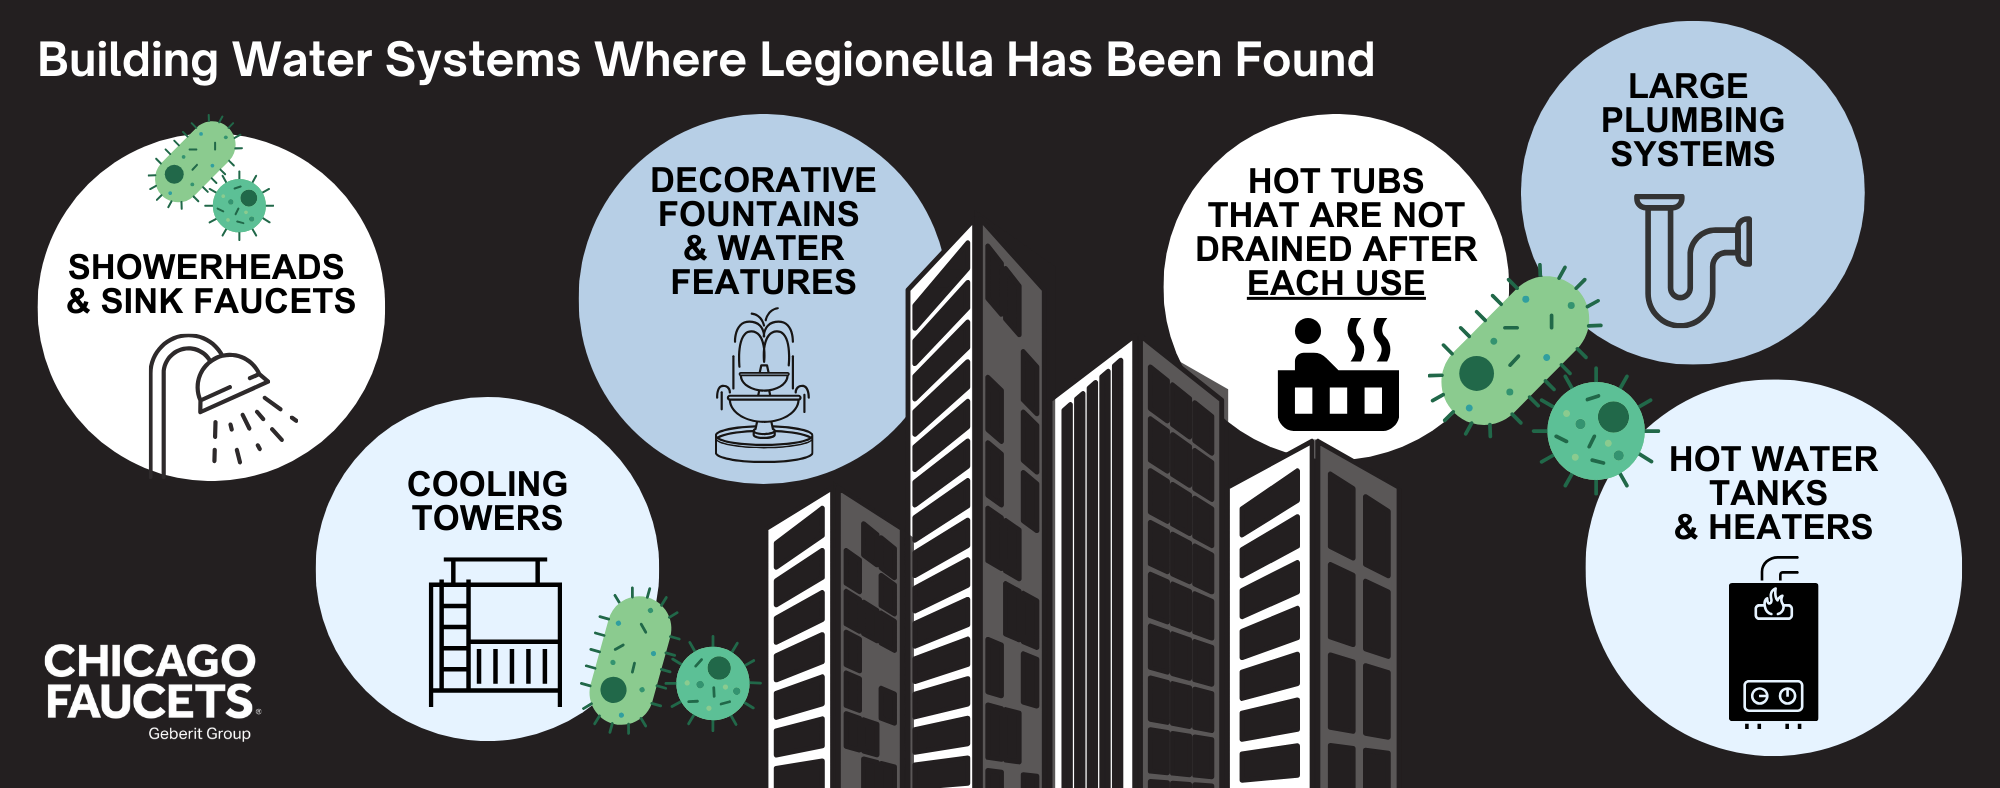 Infographic showing where Legionella has been found in buildings